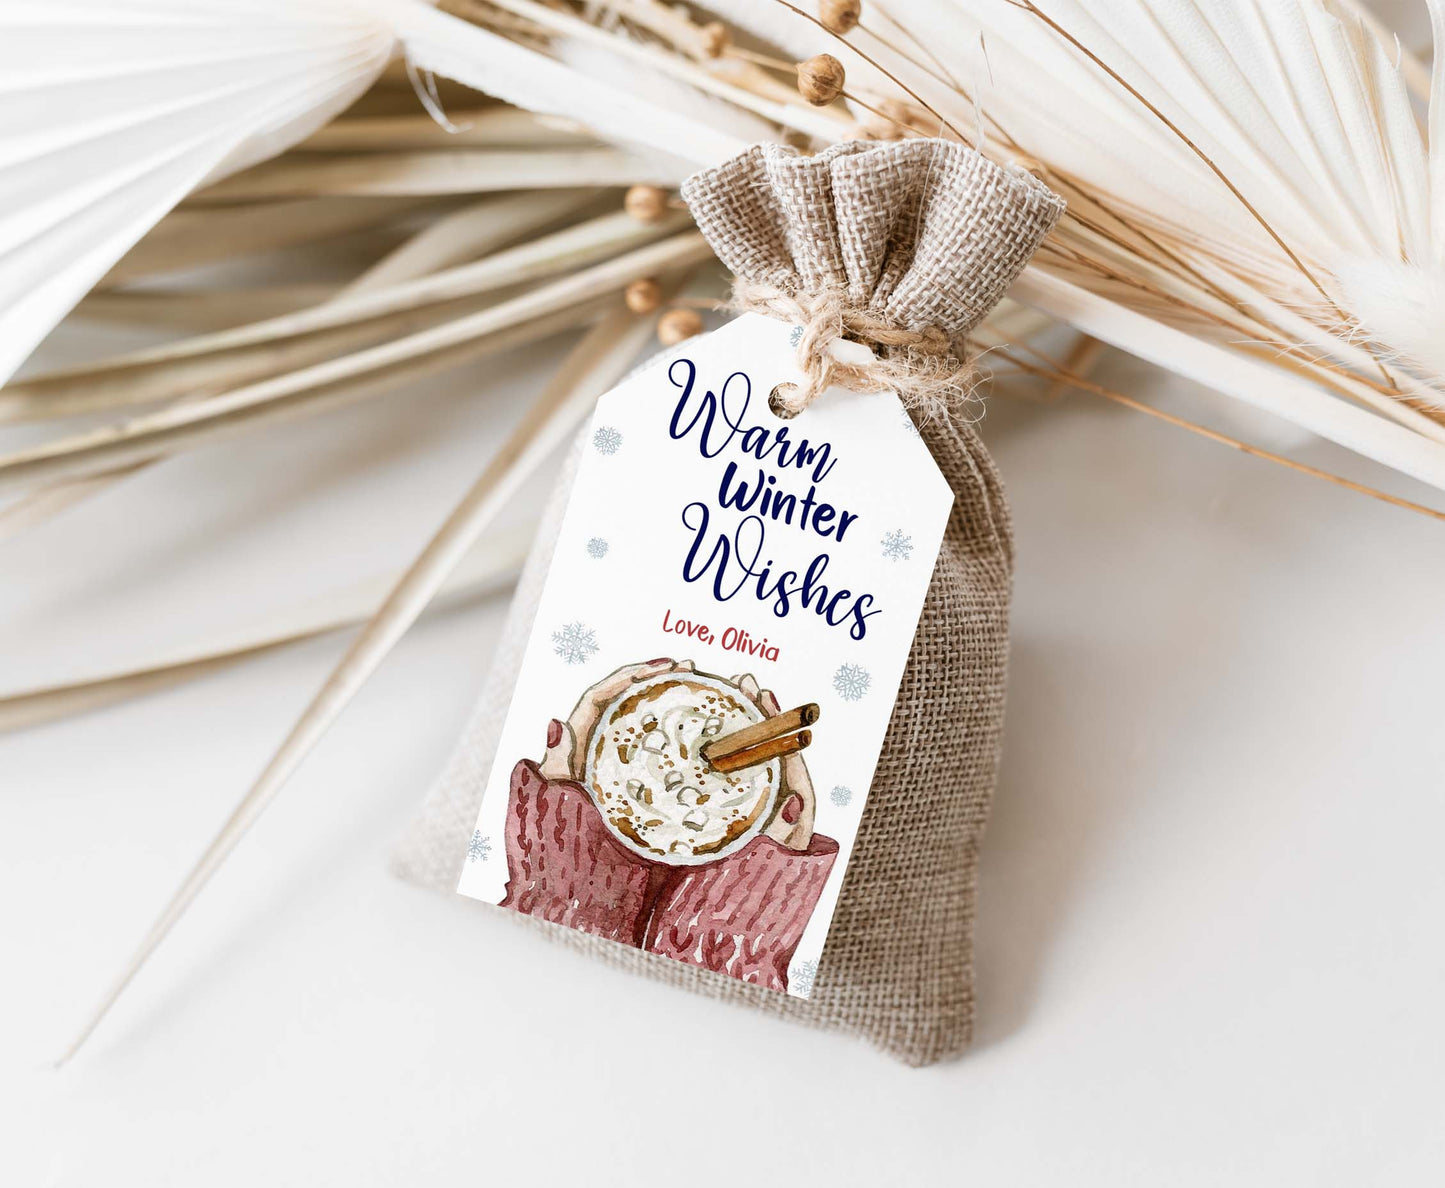 Editable Warm Winter Wishes Tags | Hot Chocolate Tags - 112